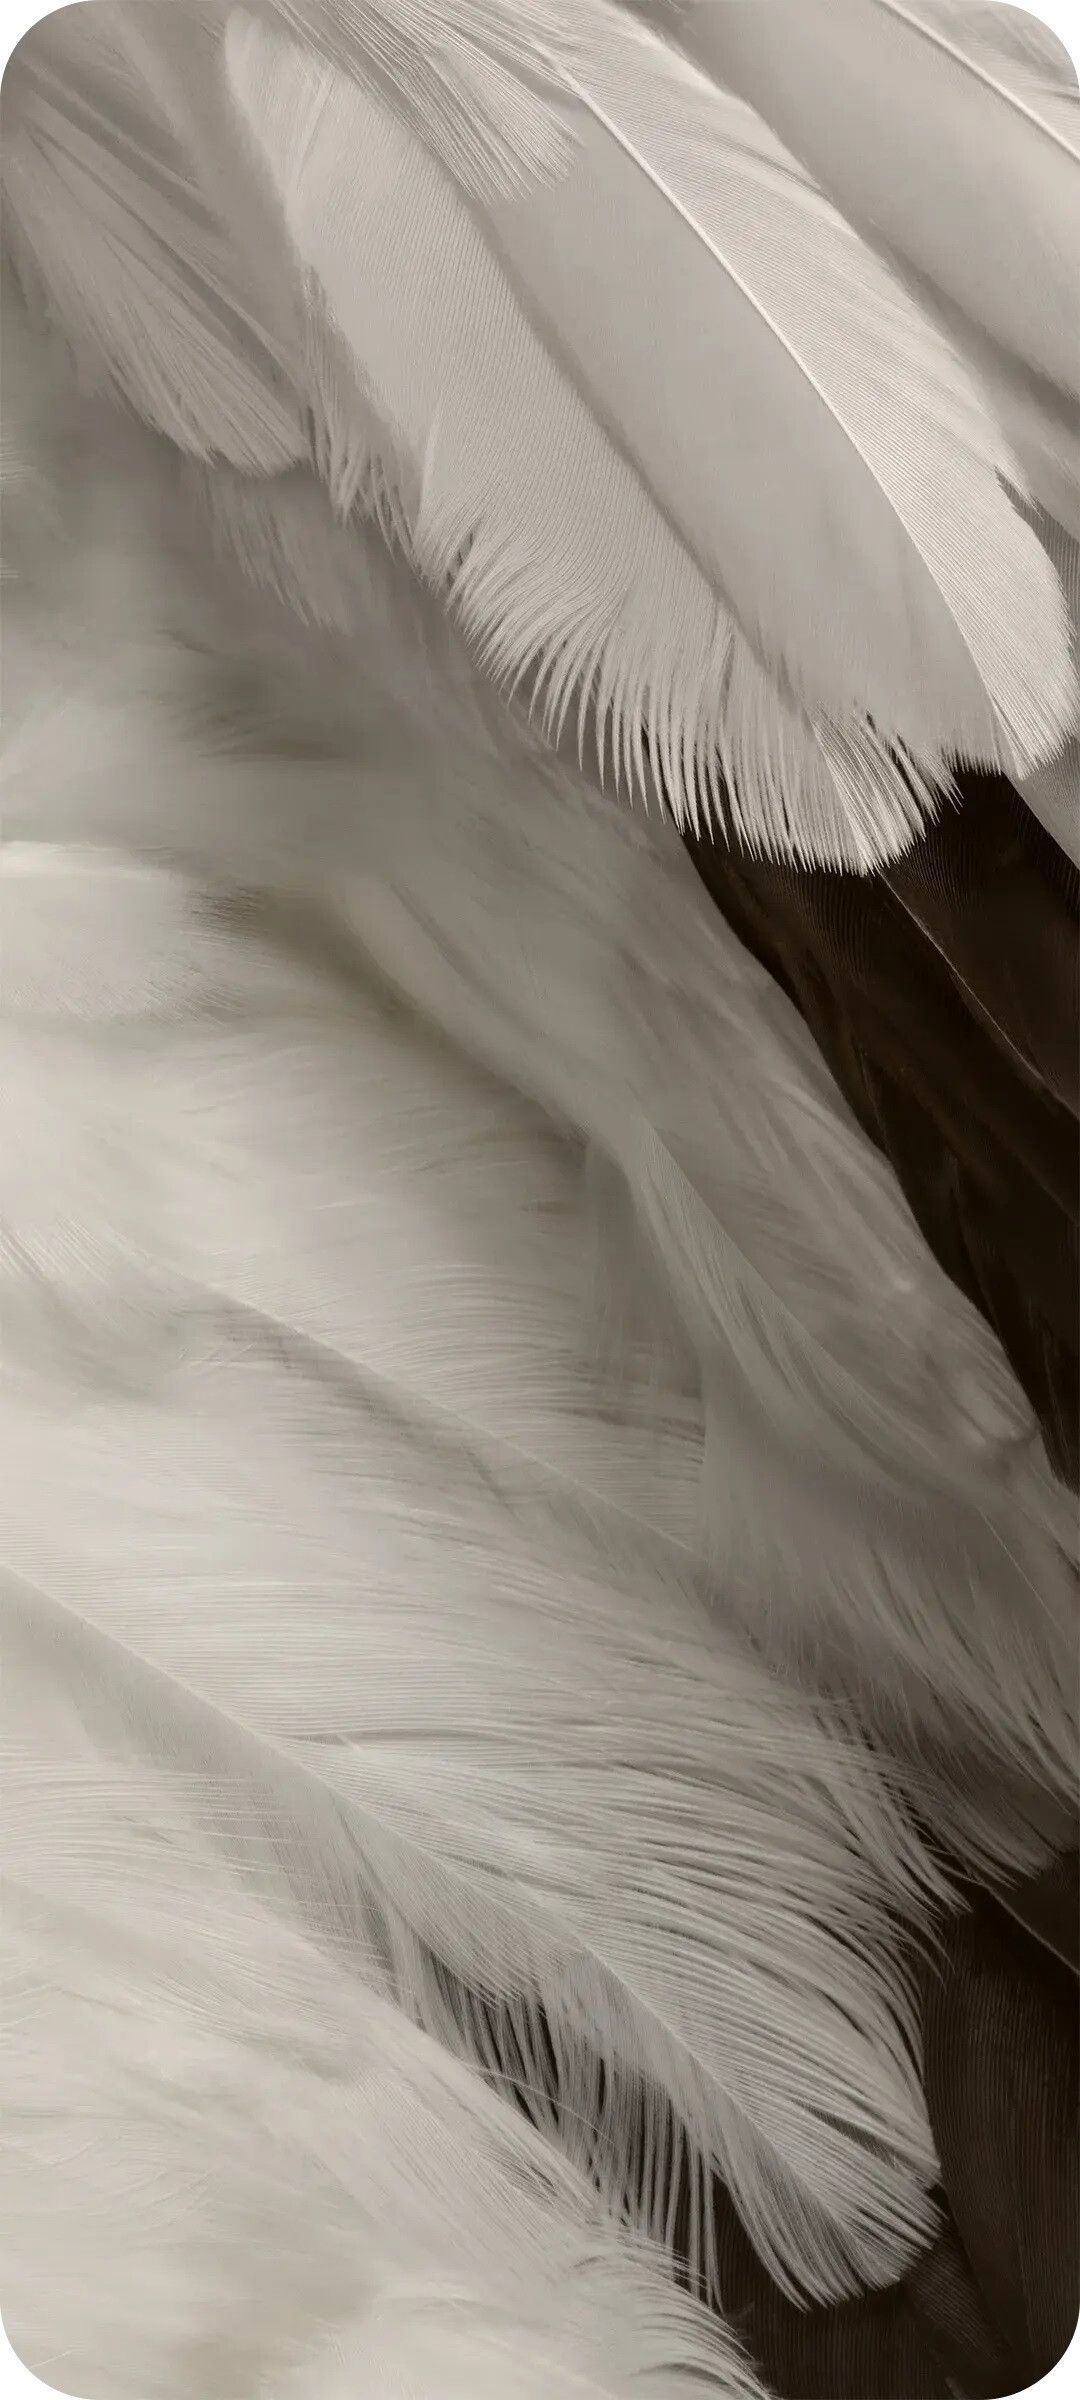 White feathers wallpaper for iPhone. Download beautiful backgrounds for your iPhone absolutely free. - Feathers